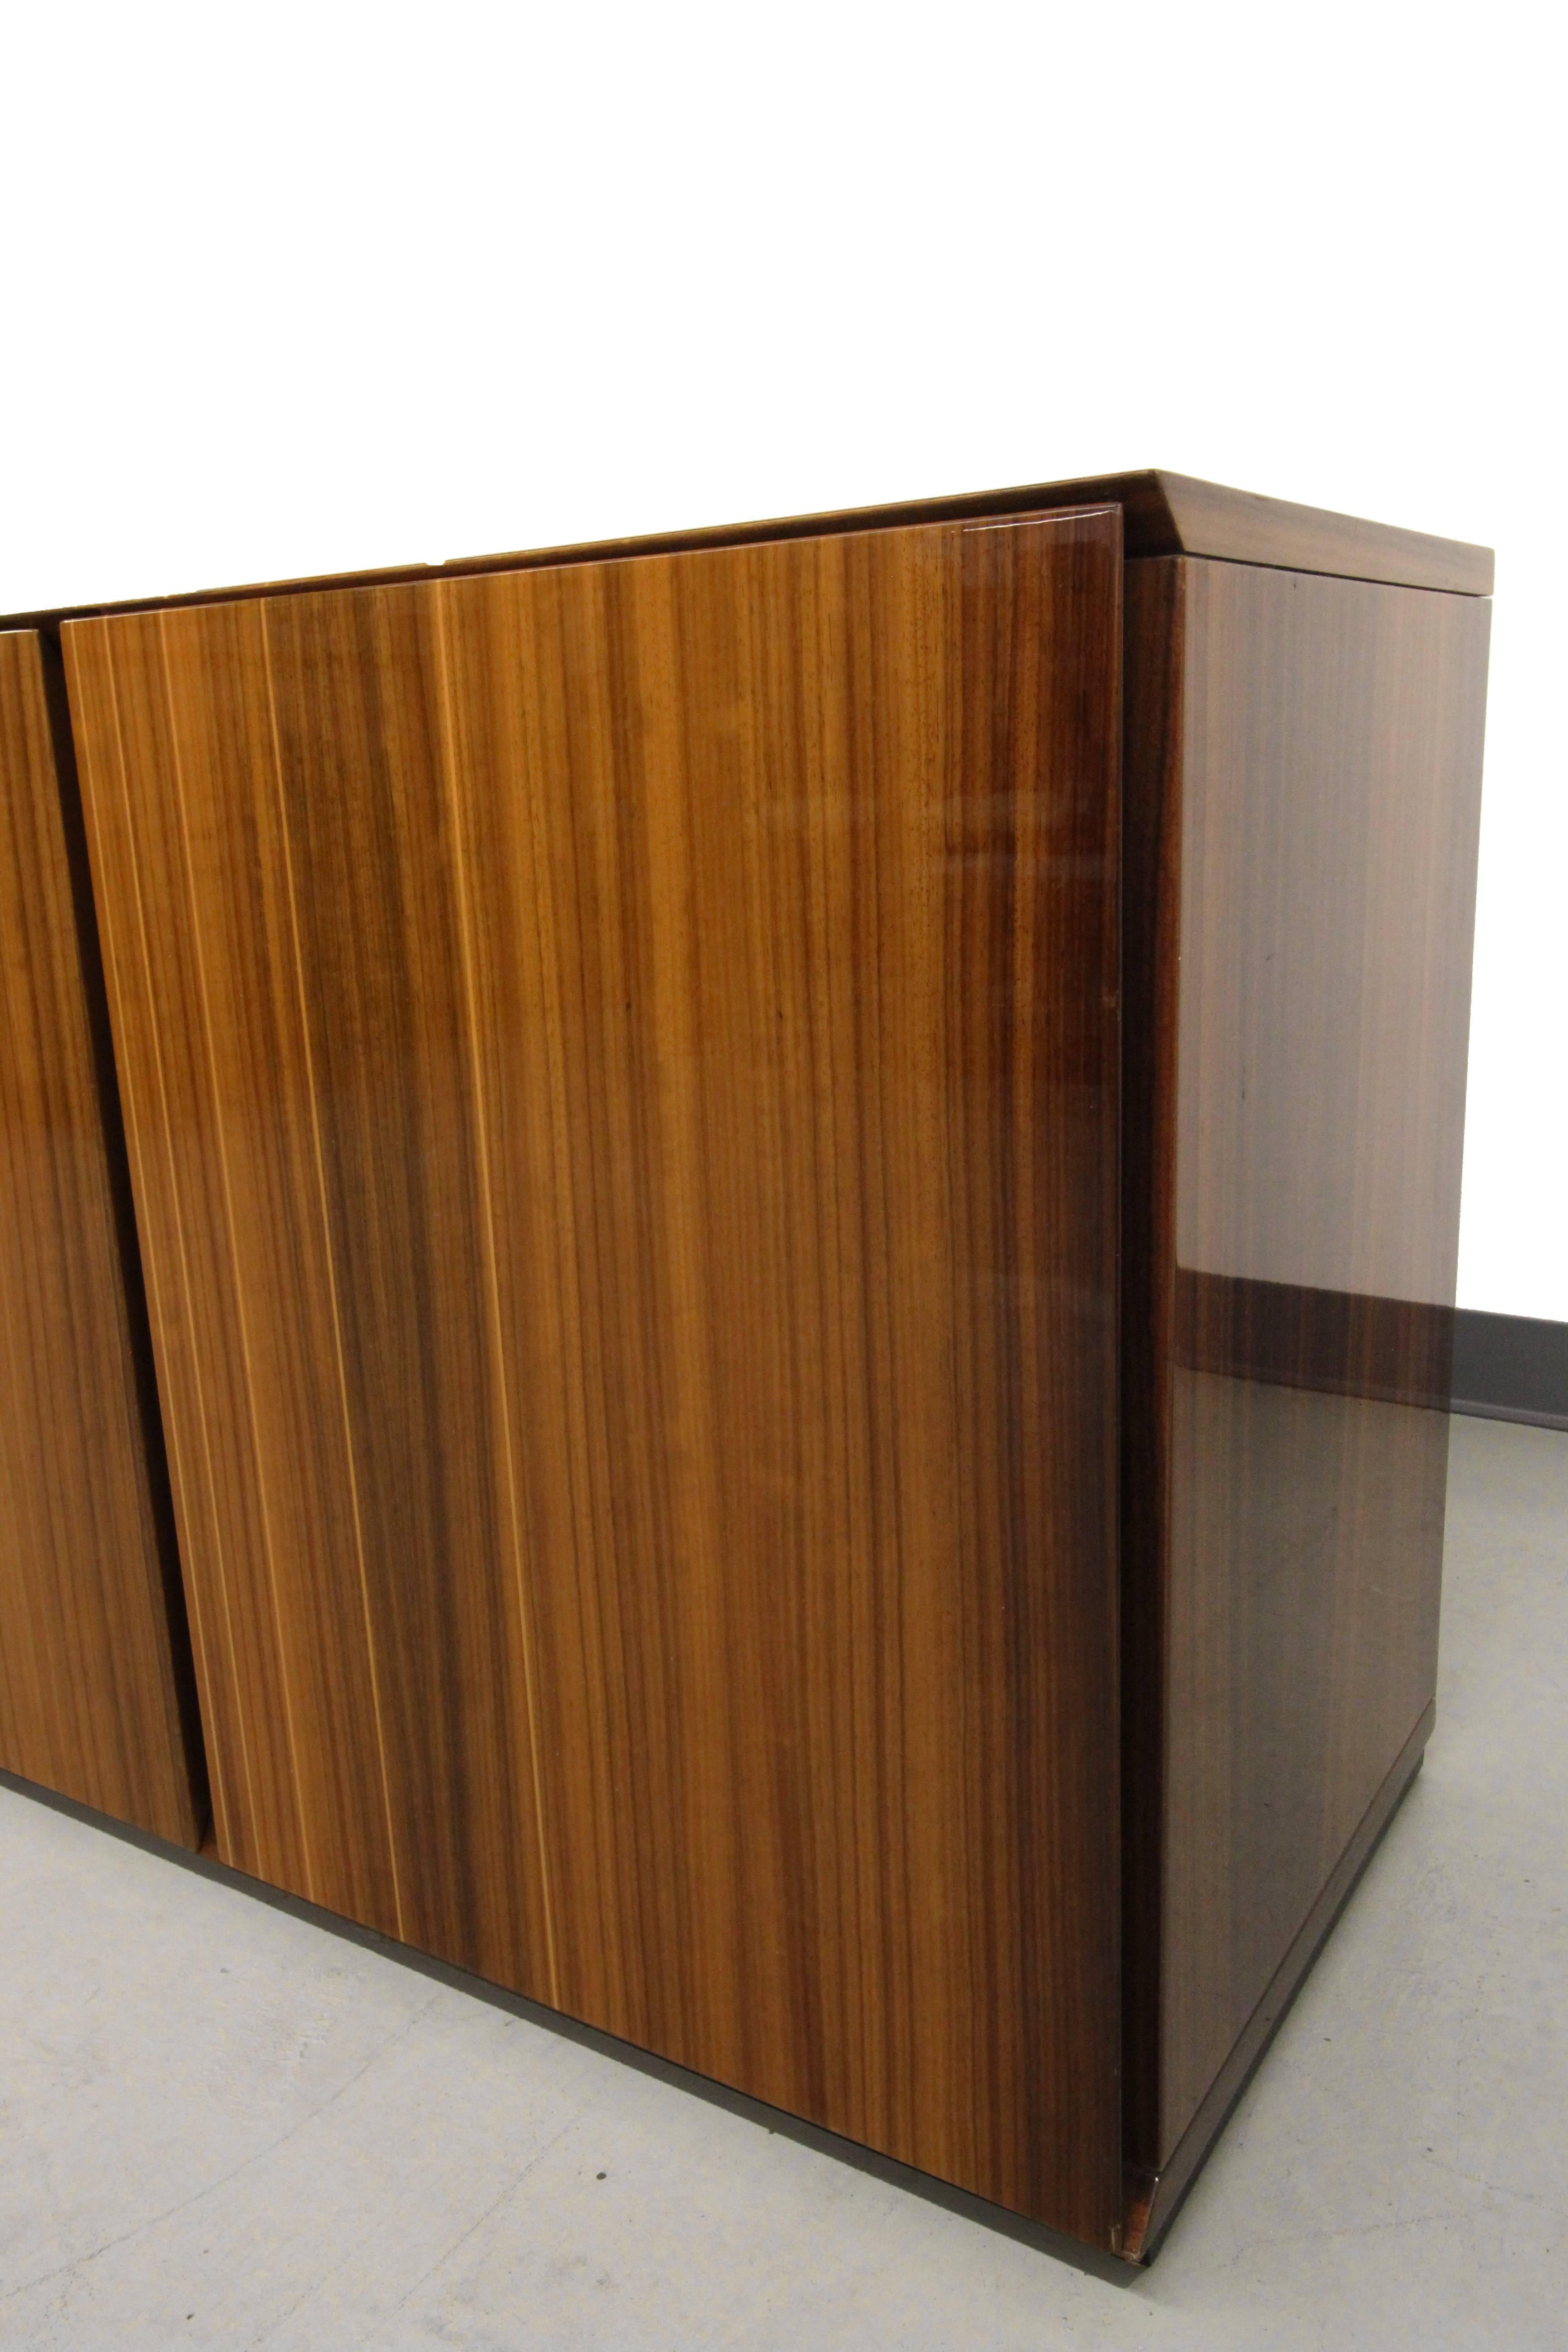 20th Century Monumental Italian Lacquered Zebrawood Credenza Buffet